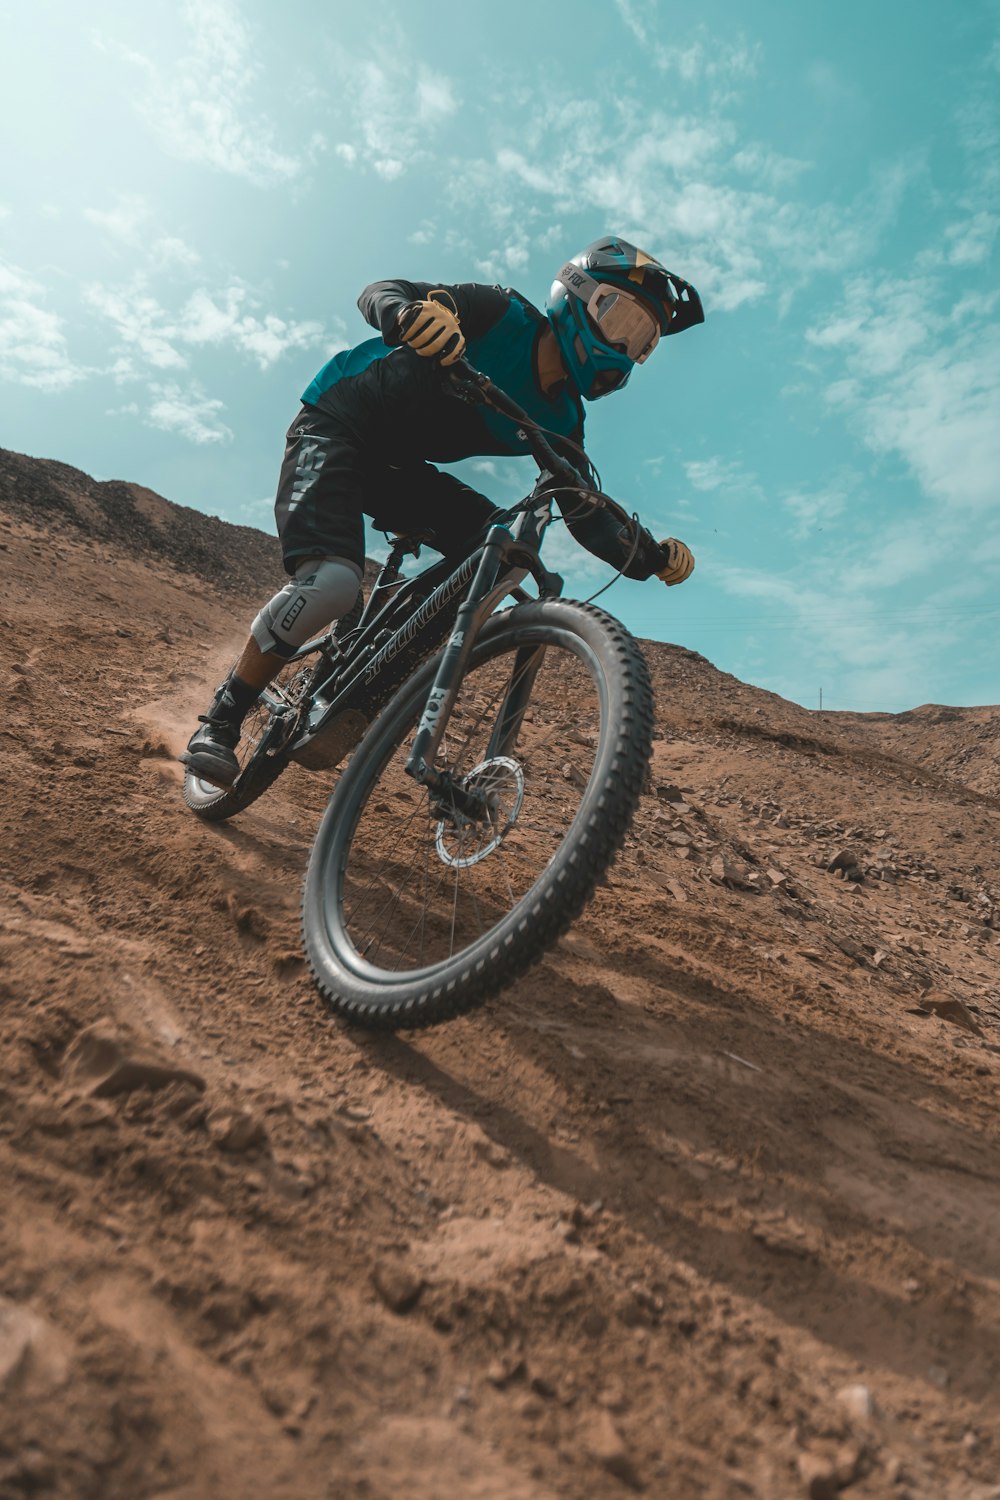 20+ Mountain Bike Pictures | Download Free Images on Unsplash